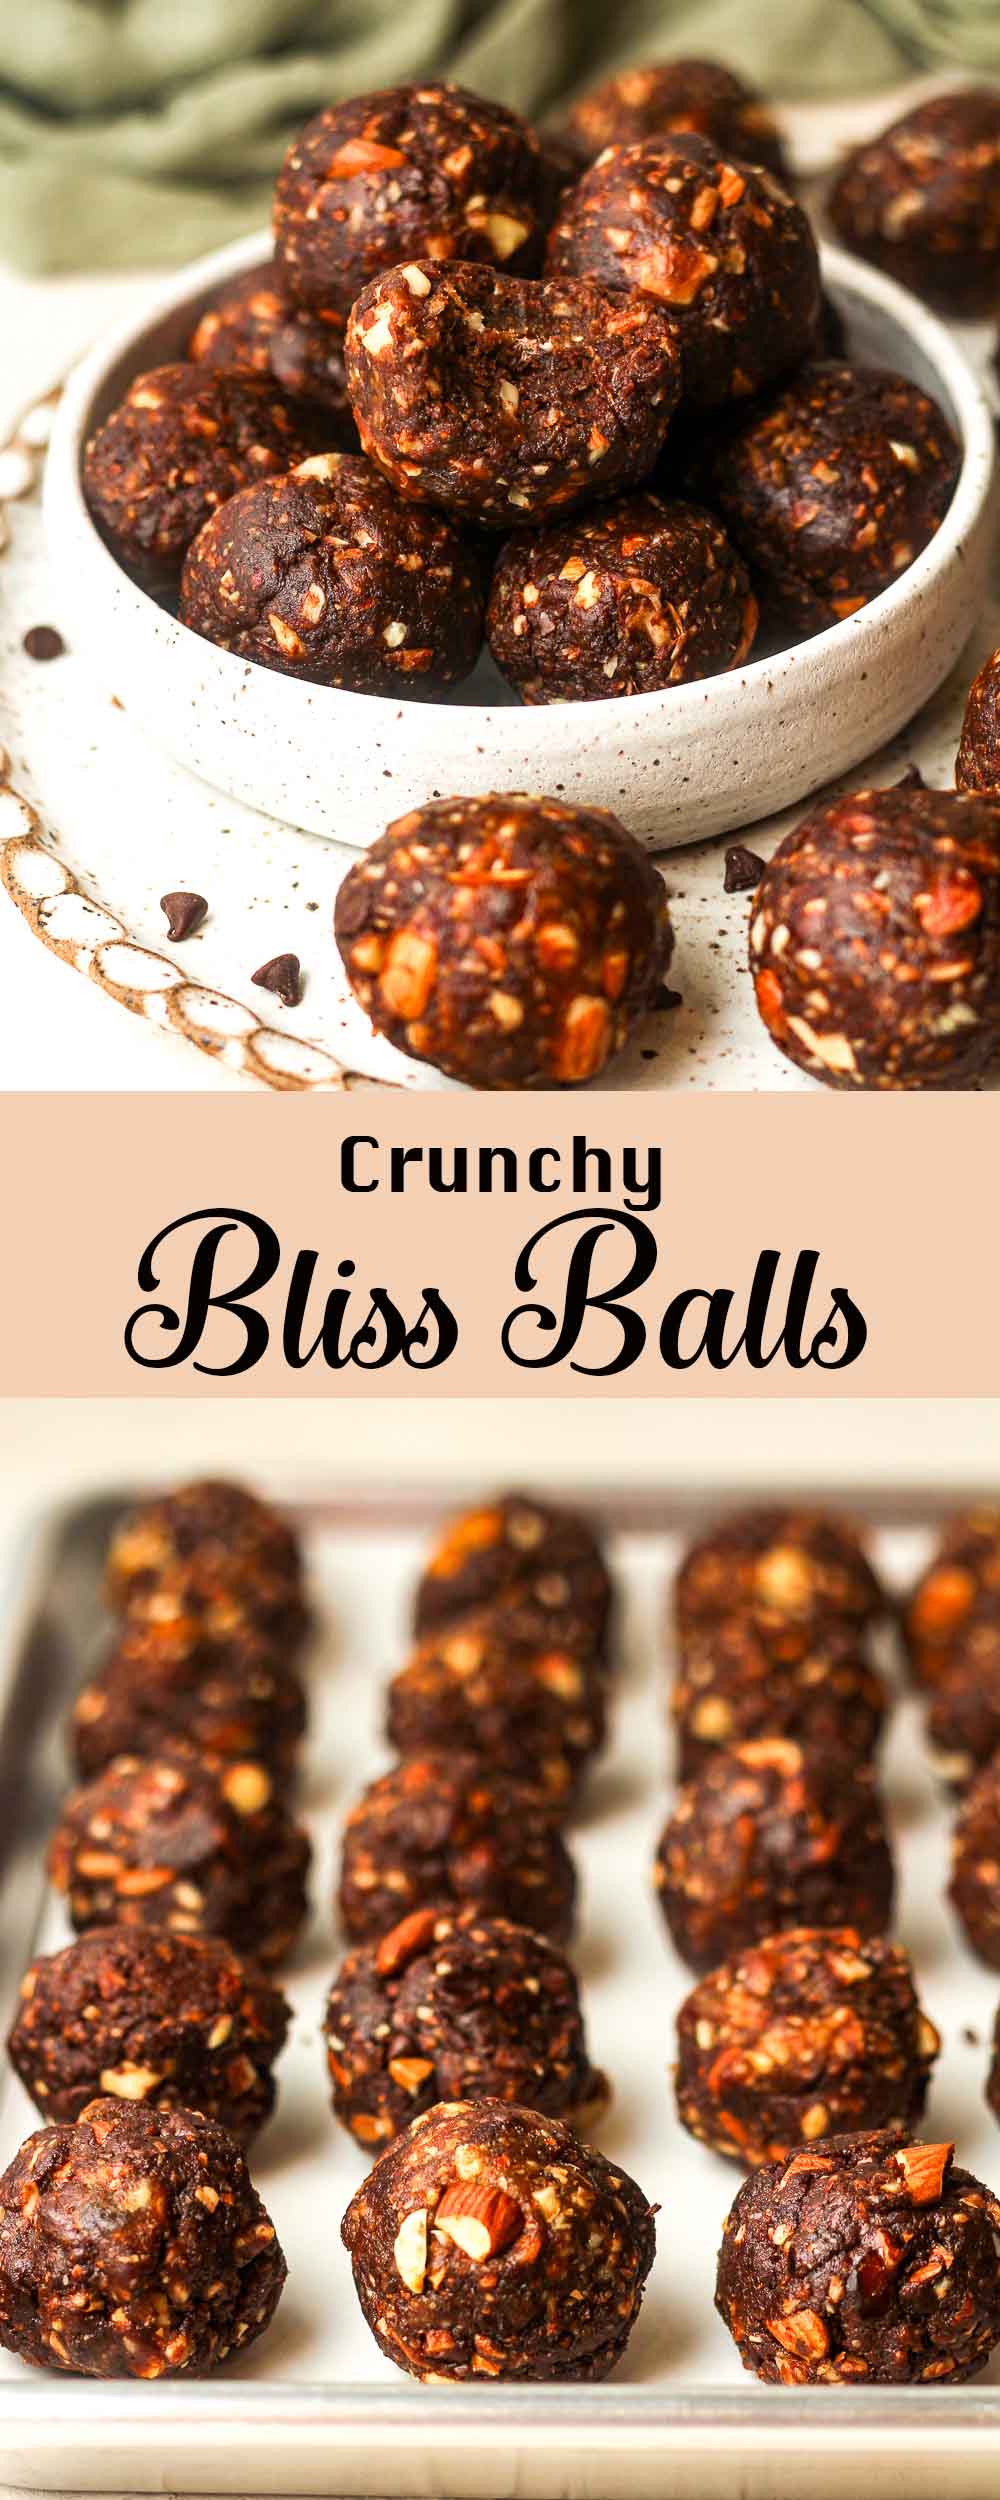 A collage of crunchy bliss balls.